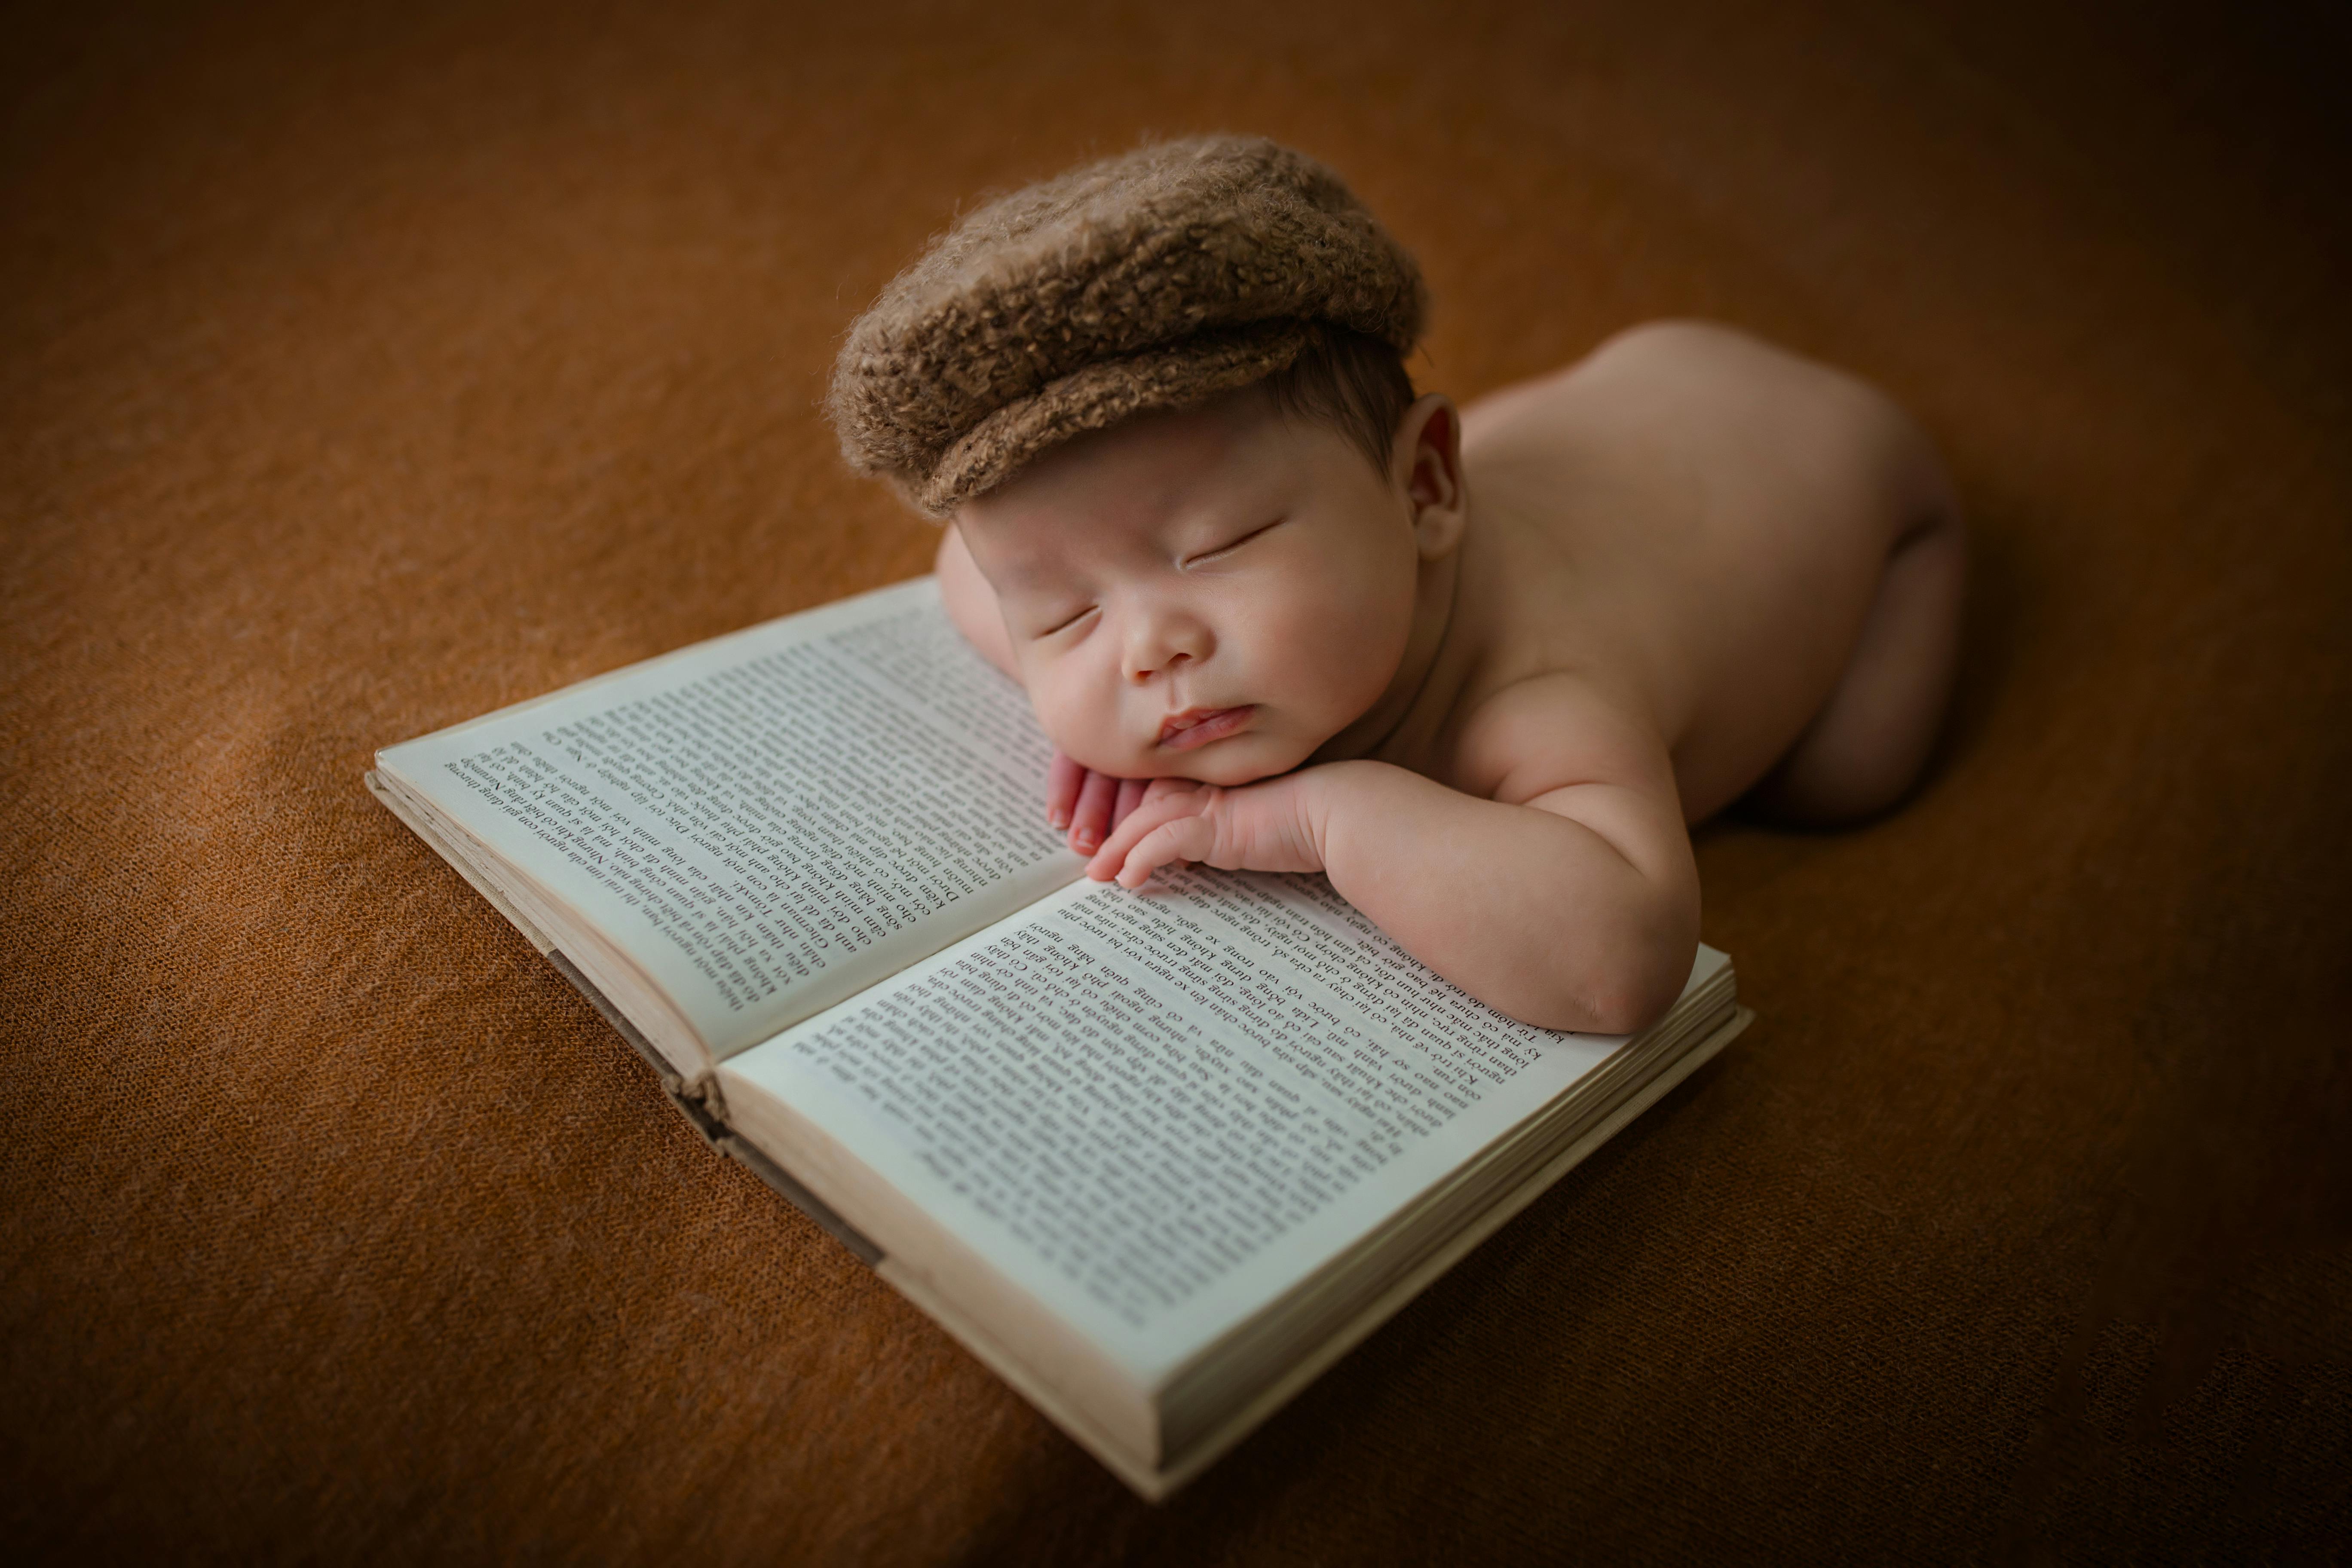 A Sleeping Baby Lying on an Open Book · Free Stock Photo